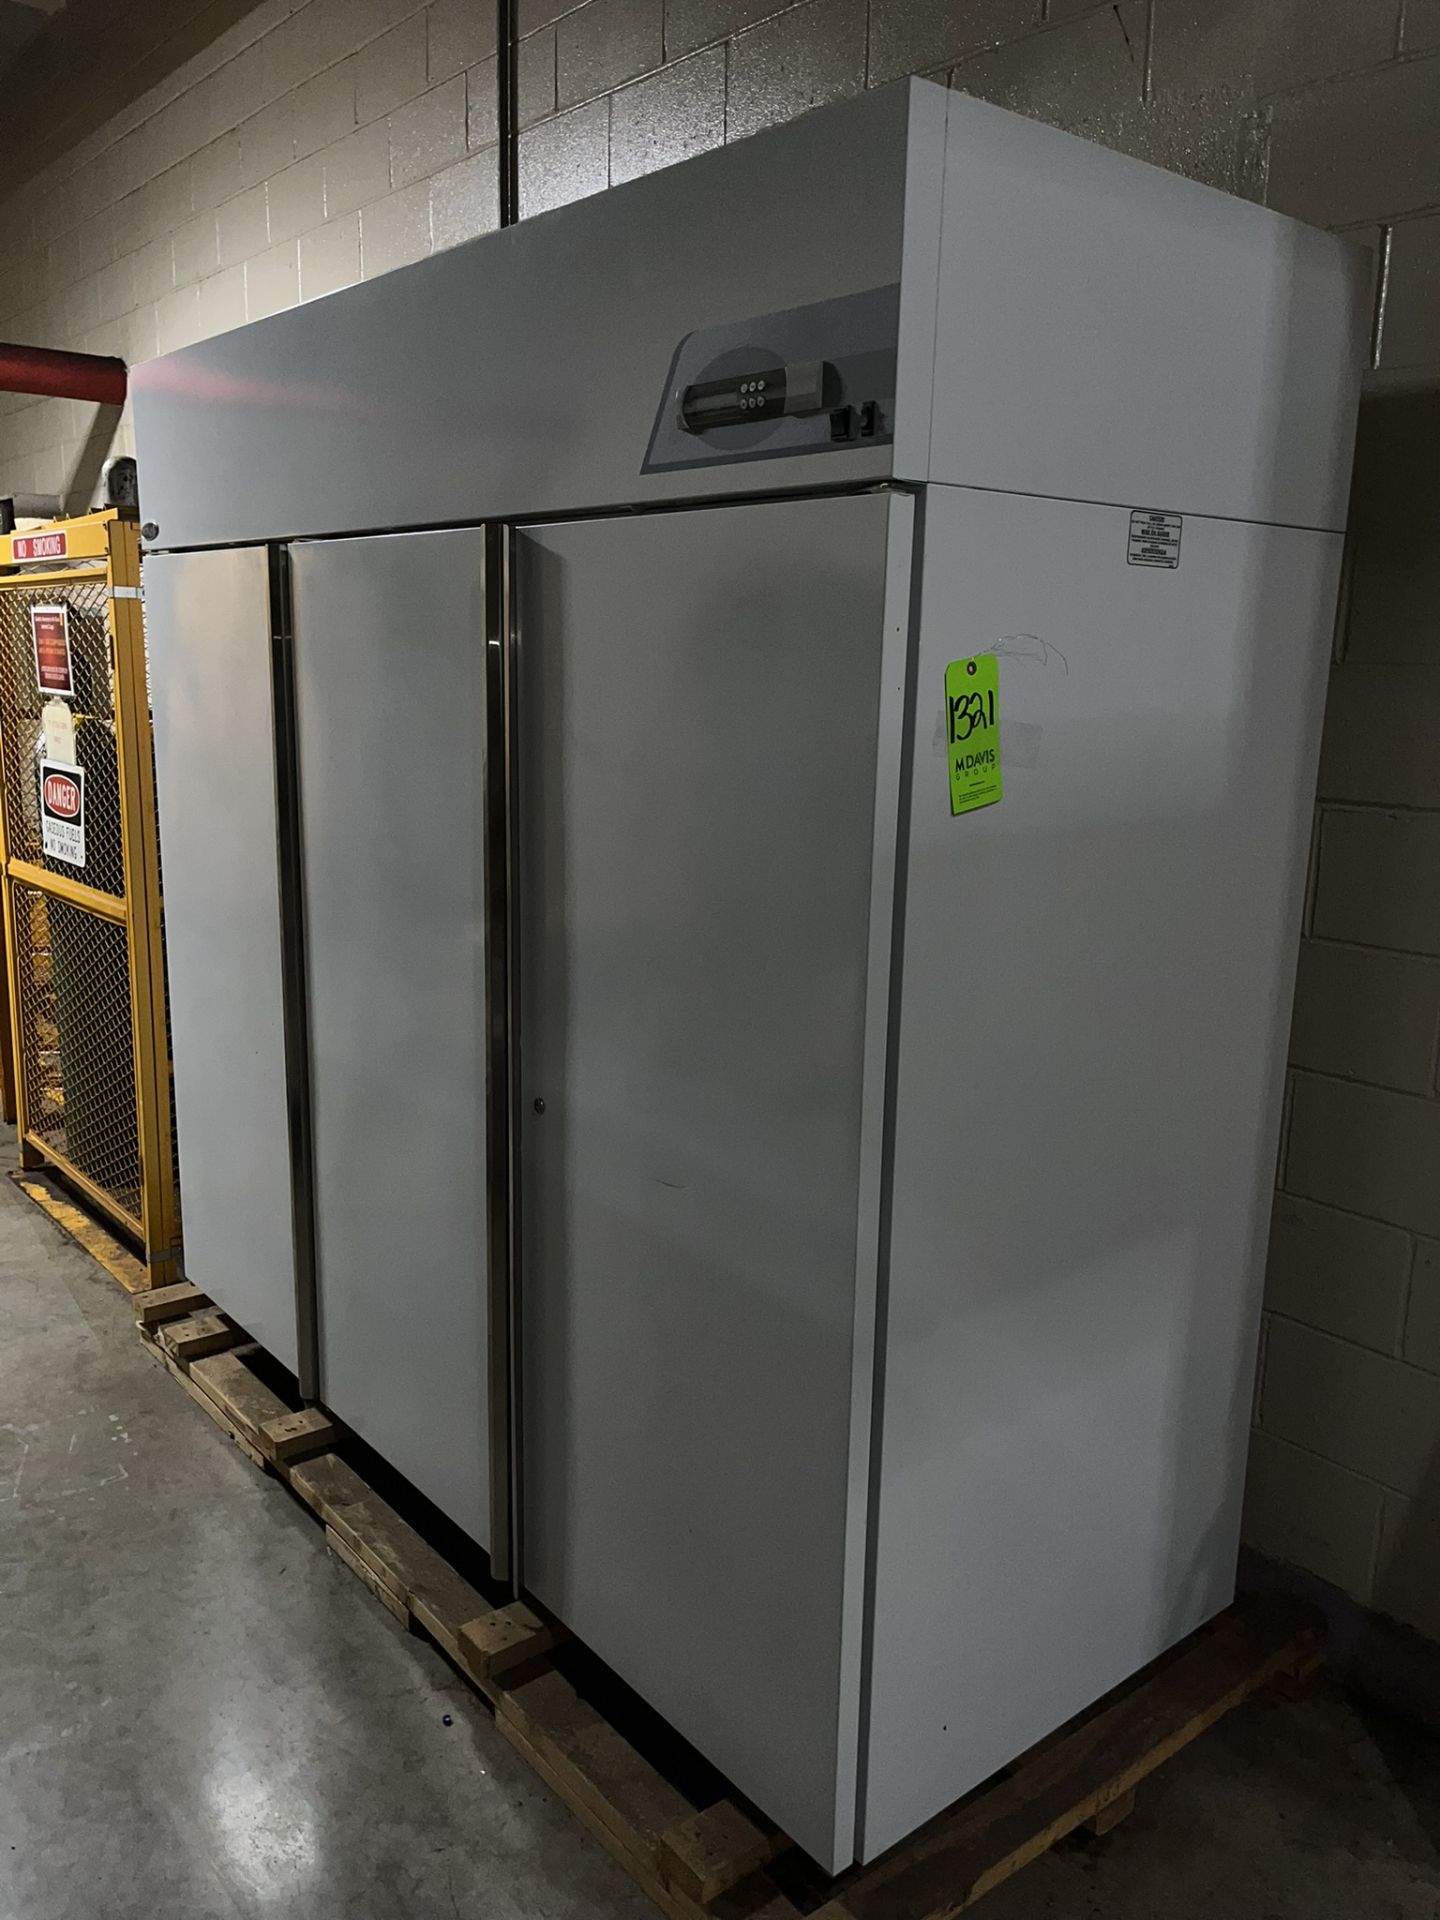 NORLAKE SCIENTIFIC STEEL PAINED WHITE LABORATORY REFRIGERATOR THREE SECTIONS (NEED DIMS)